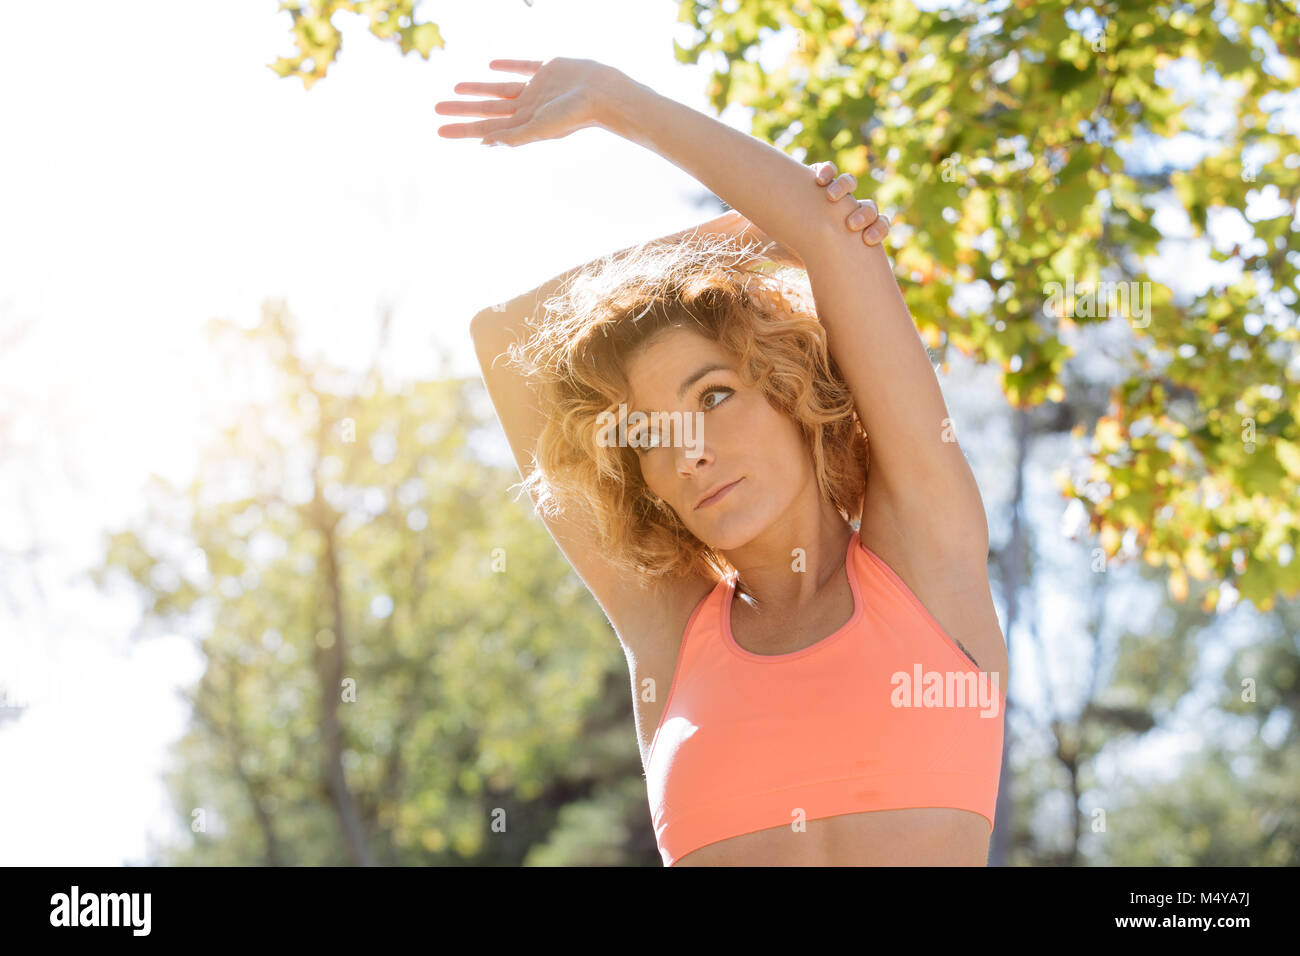 young fitness woman runner stretching arm before run Stock Photo